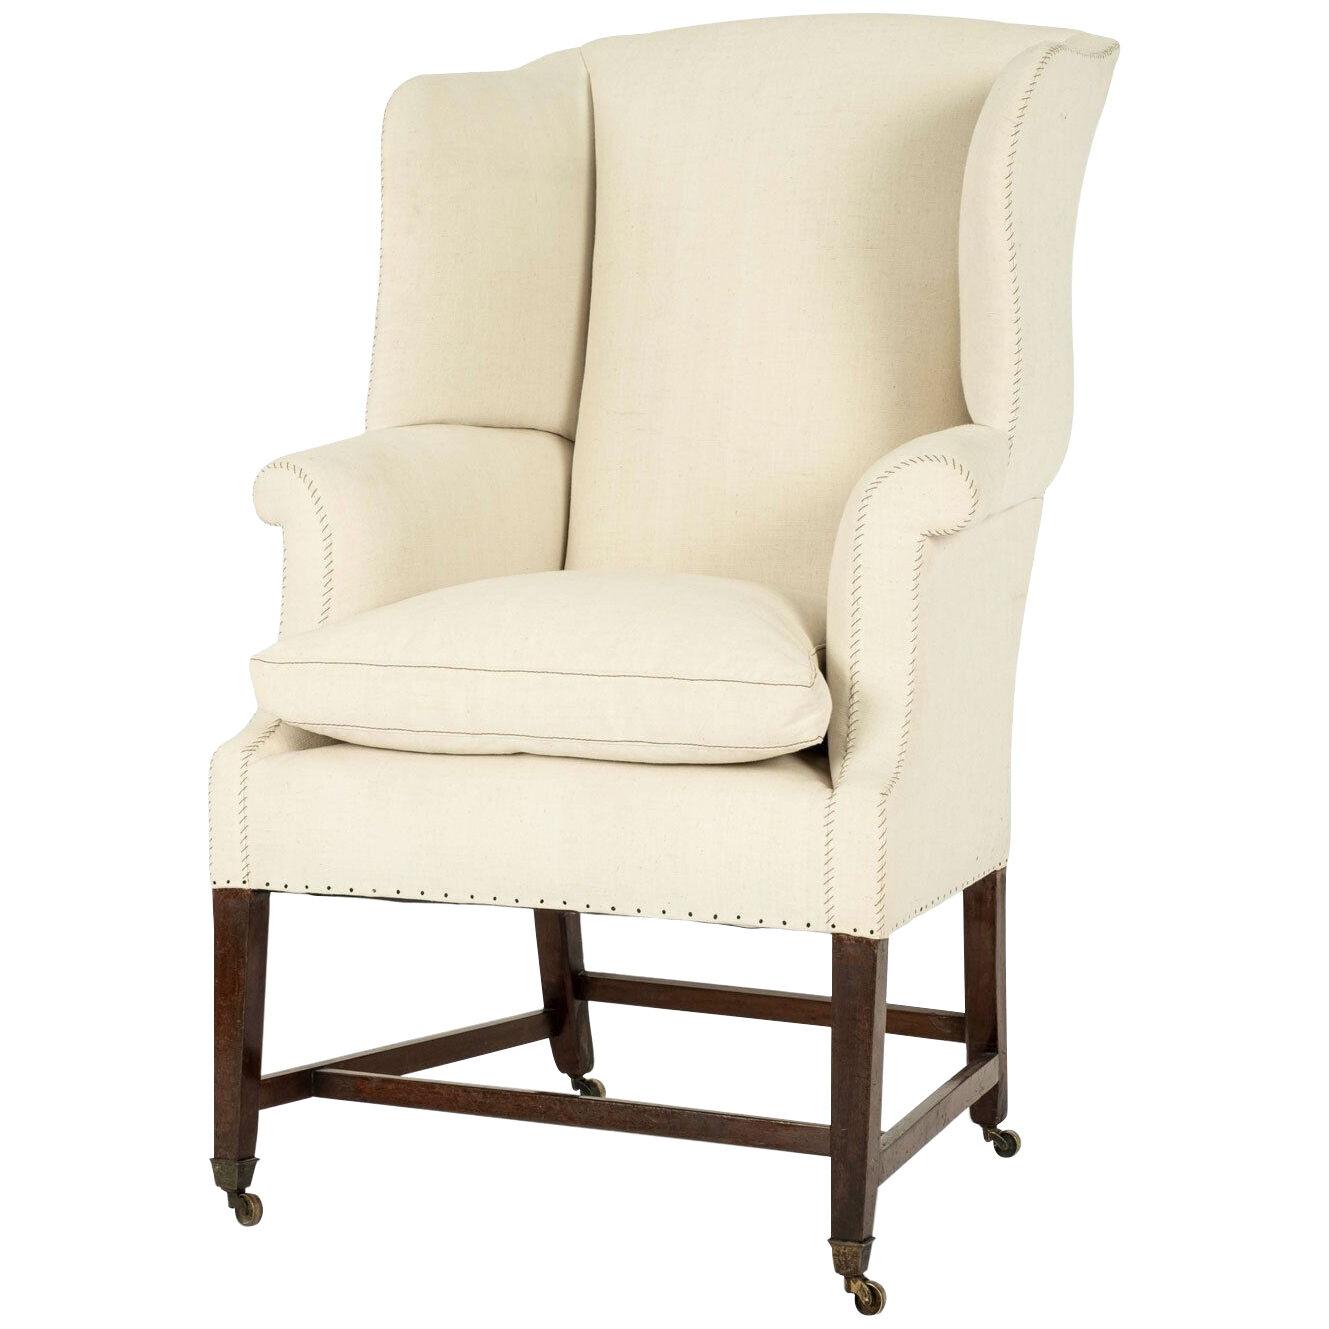 19th Century Wingback Upholstered in Antique Linen